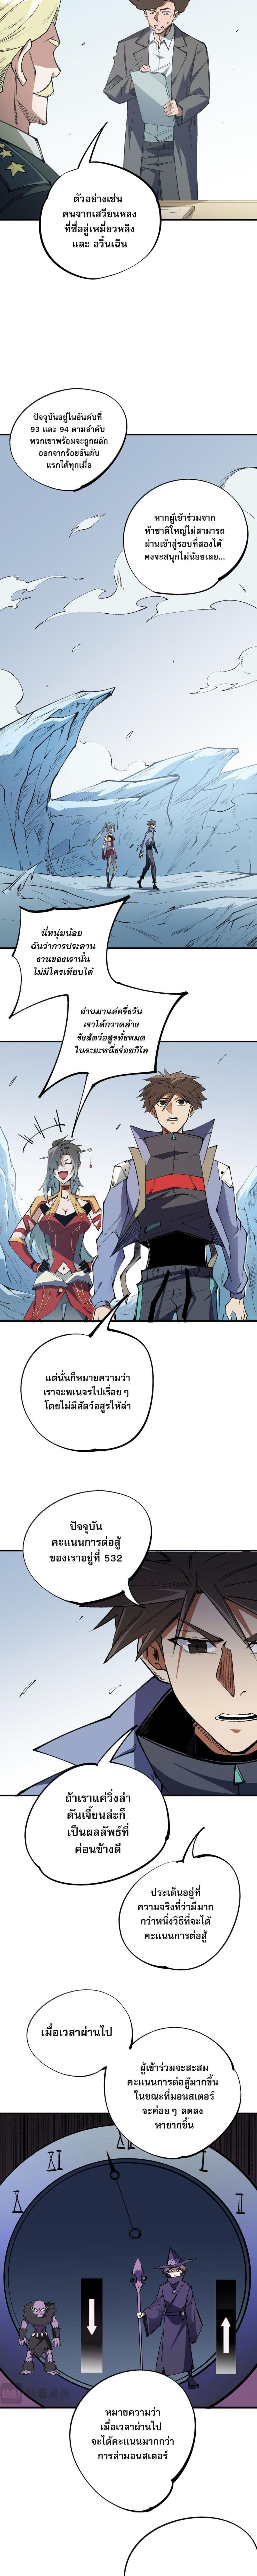 Job Changing for the Entire Population: The Jobless Me Will Terminate the Gods ฉันคือผู้เล่นไร้อาชีพที่สังหารเหล่าเทพ 64-64